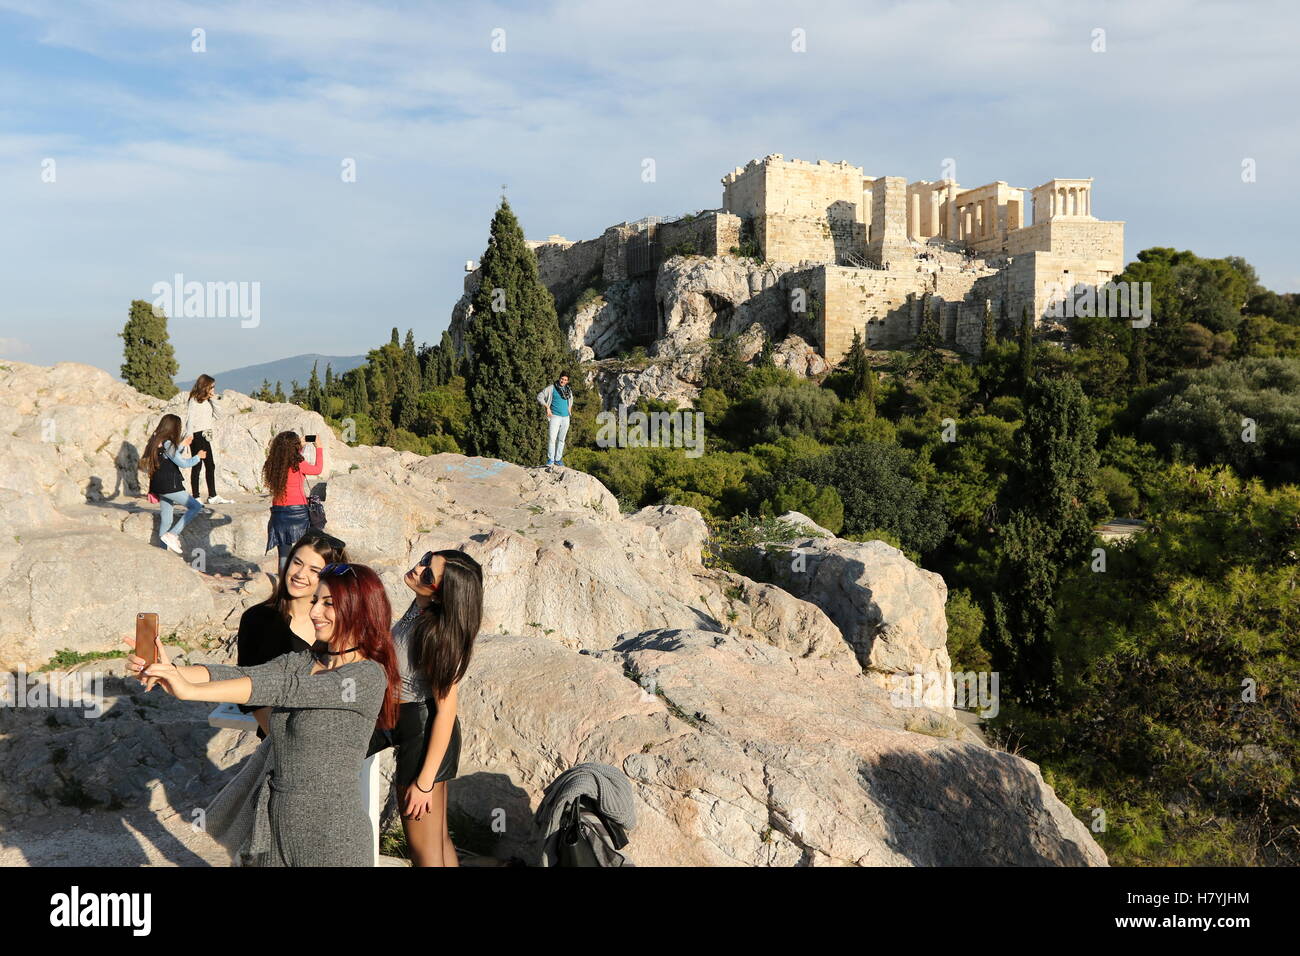 Young women taking a photograph of themselves at Areopagus hill, overlooking the Acropolis in Athens Greece Stock Photo